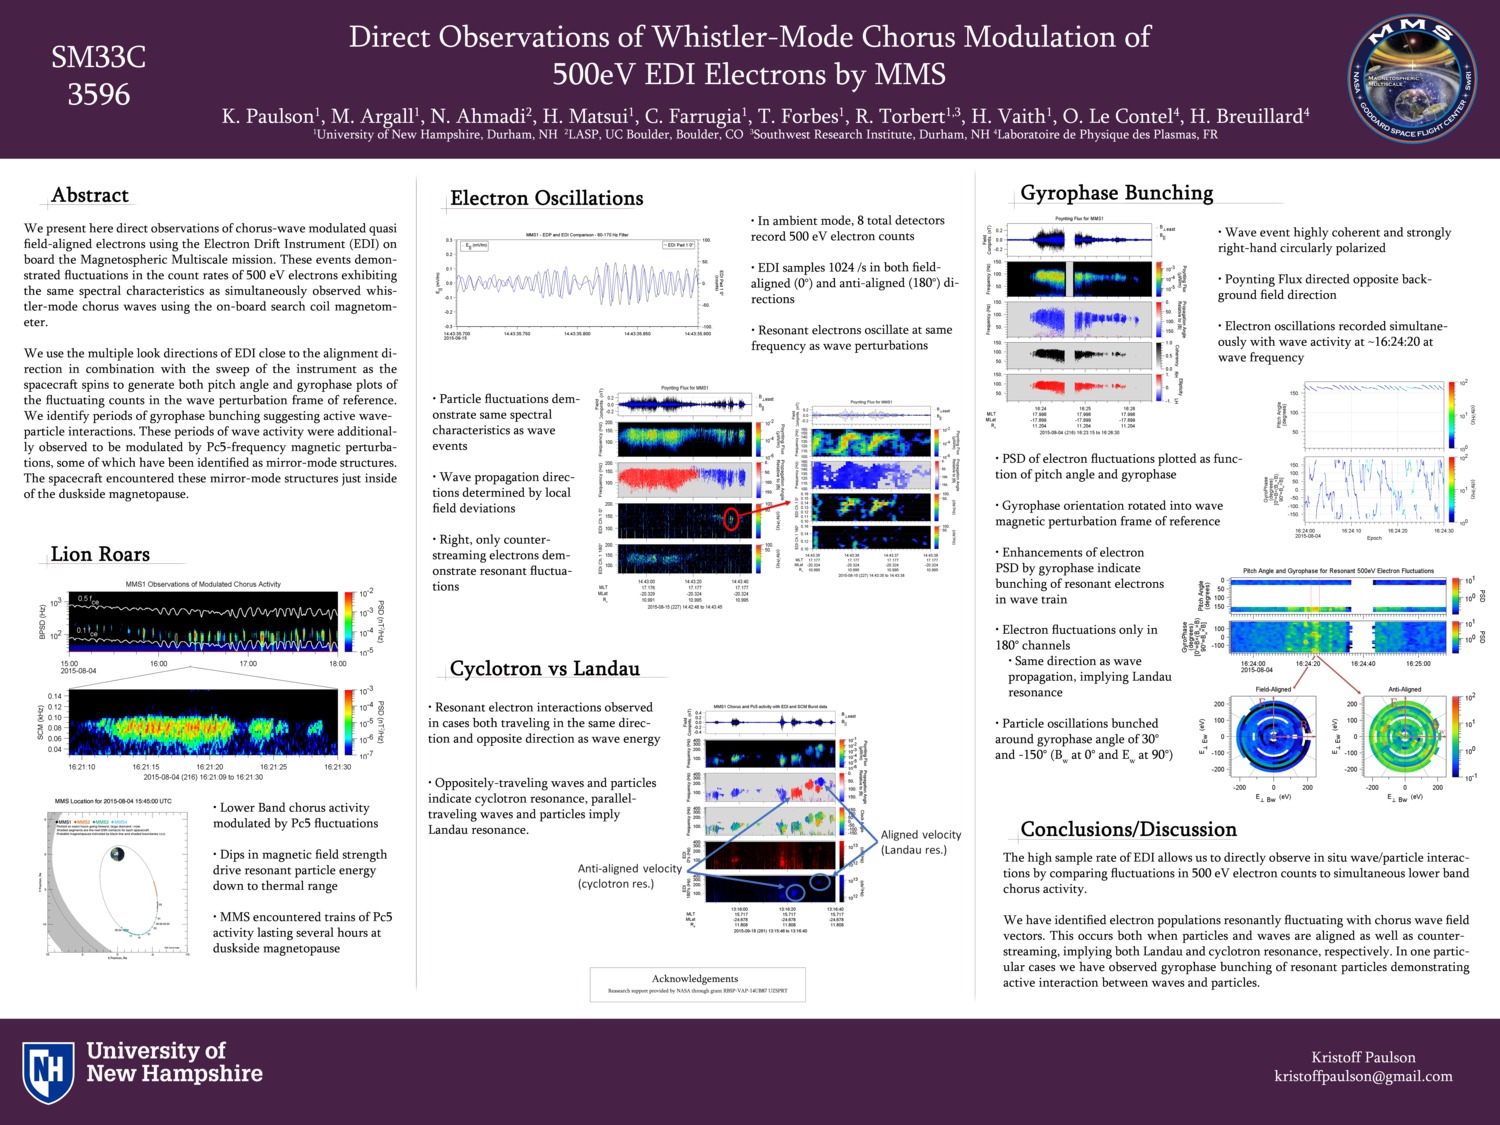 Direct Observations Of Whistler-Mode Chorus Modulation Of 500ev Edi Electrons By Mms by kwd5